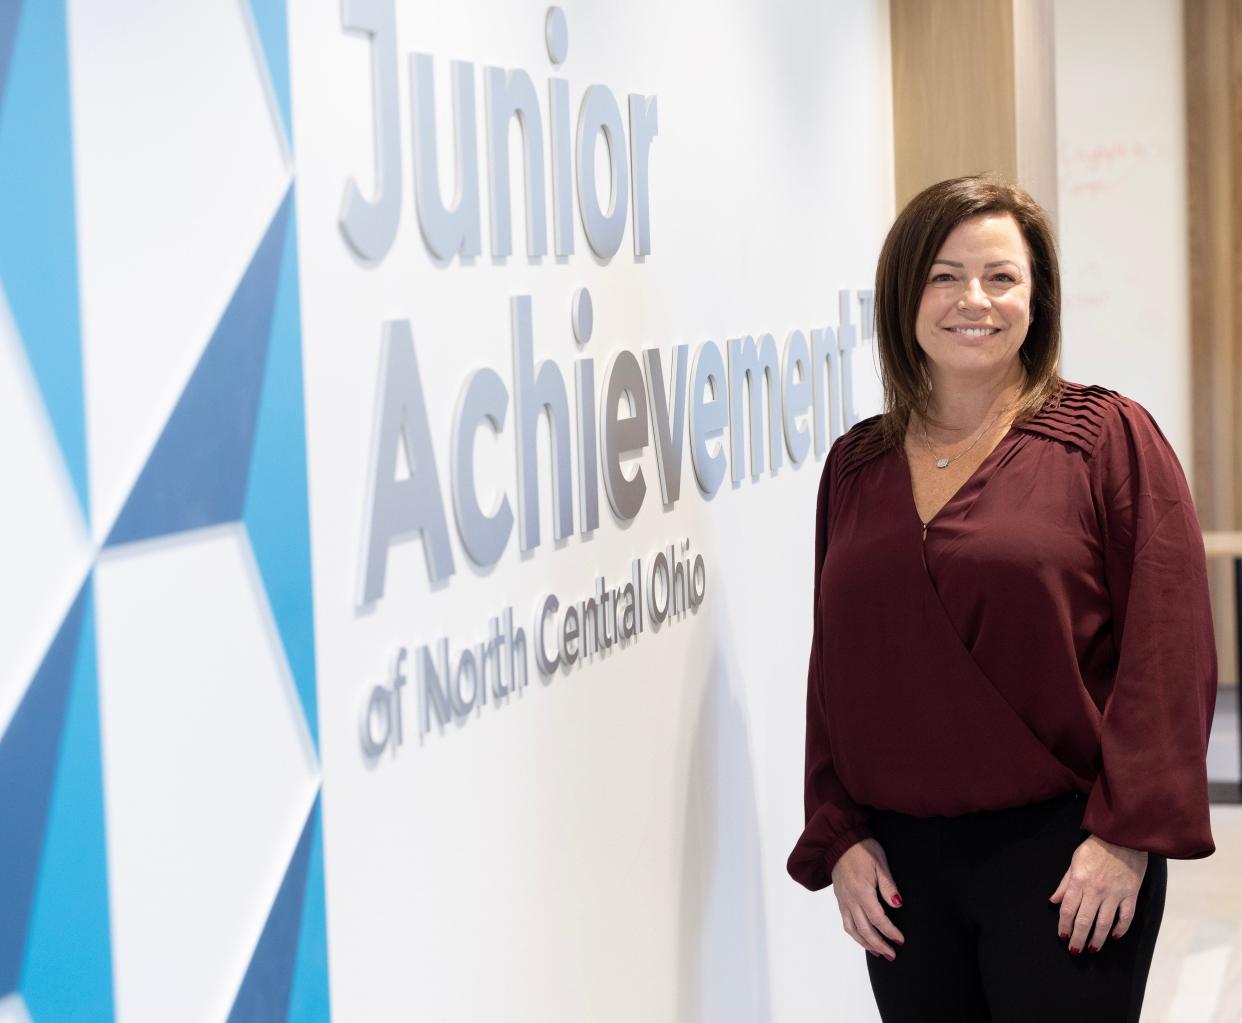 Molly Wobbecke Shaw is a program manager at Junior Achievement of North Central Ohio in the Canton location. She worked for 20 years in the developmental disabilities field before coming to work at Junior Achievement just over a year ago.